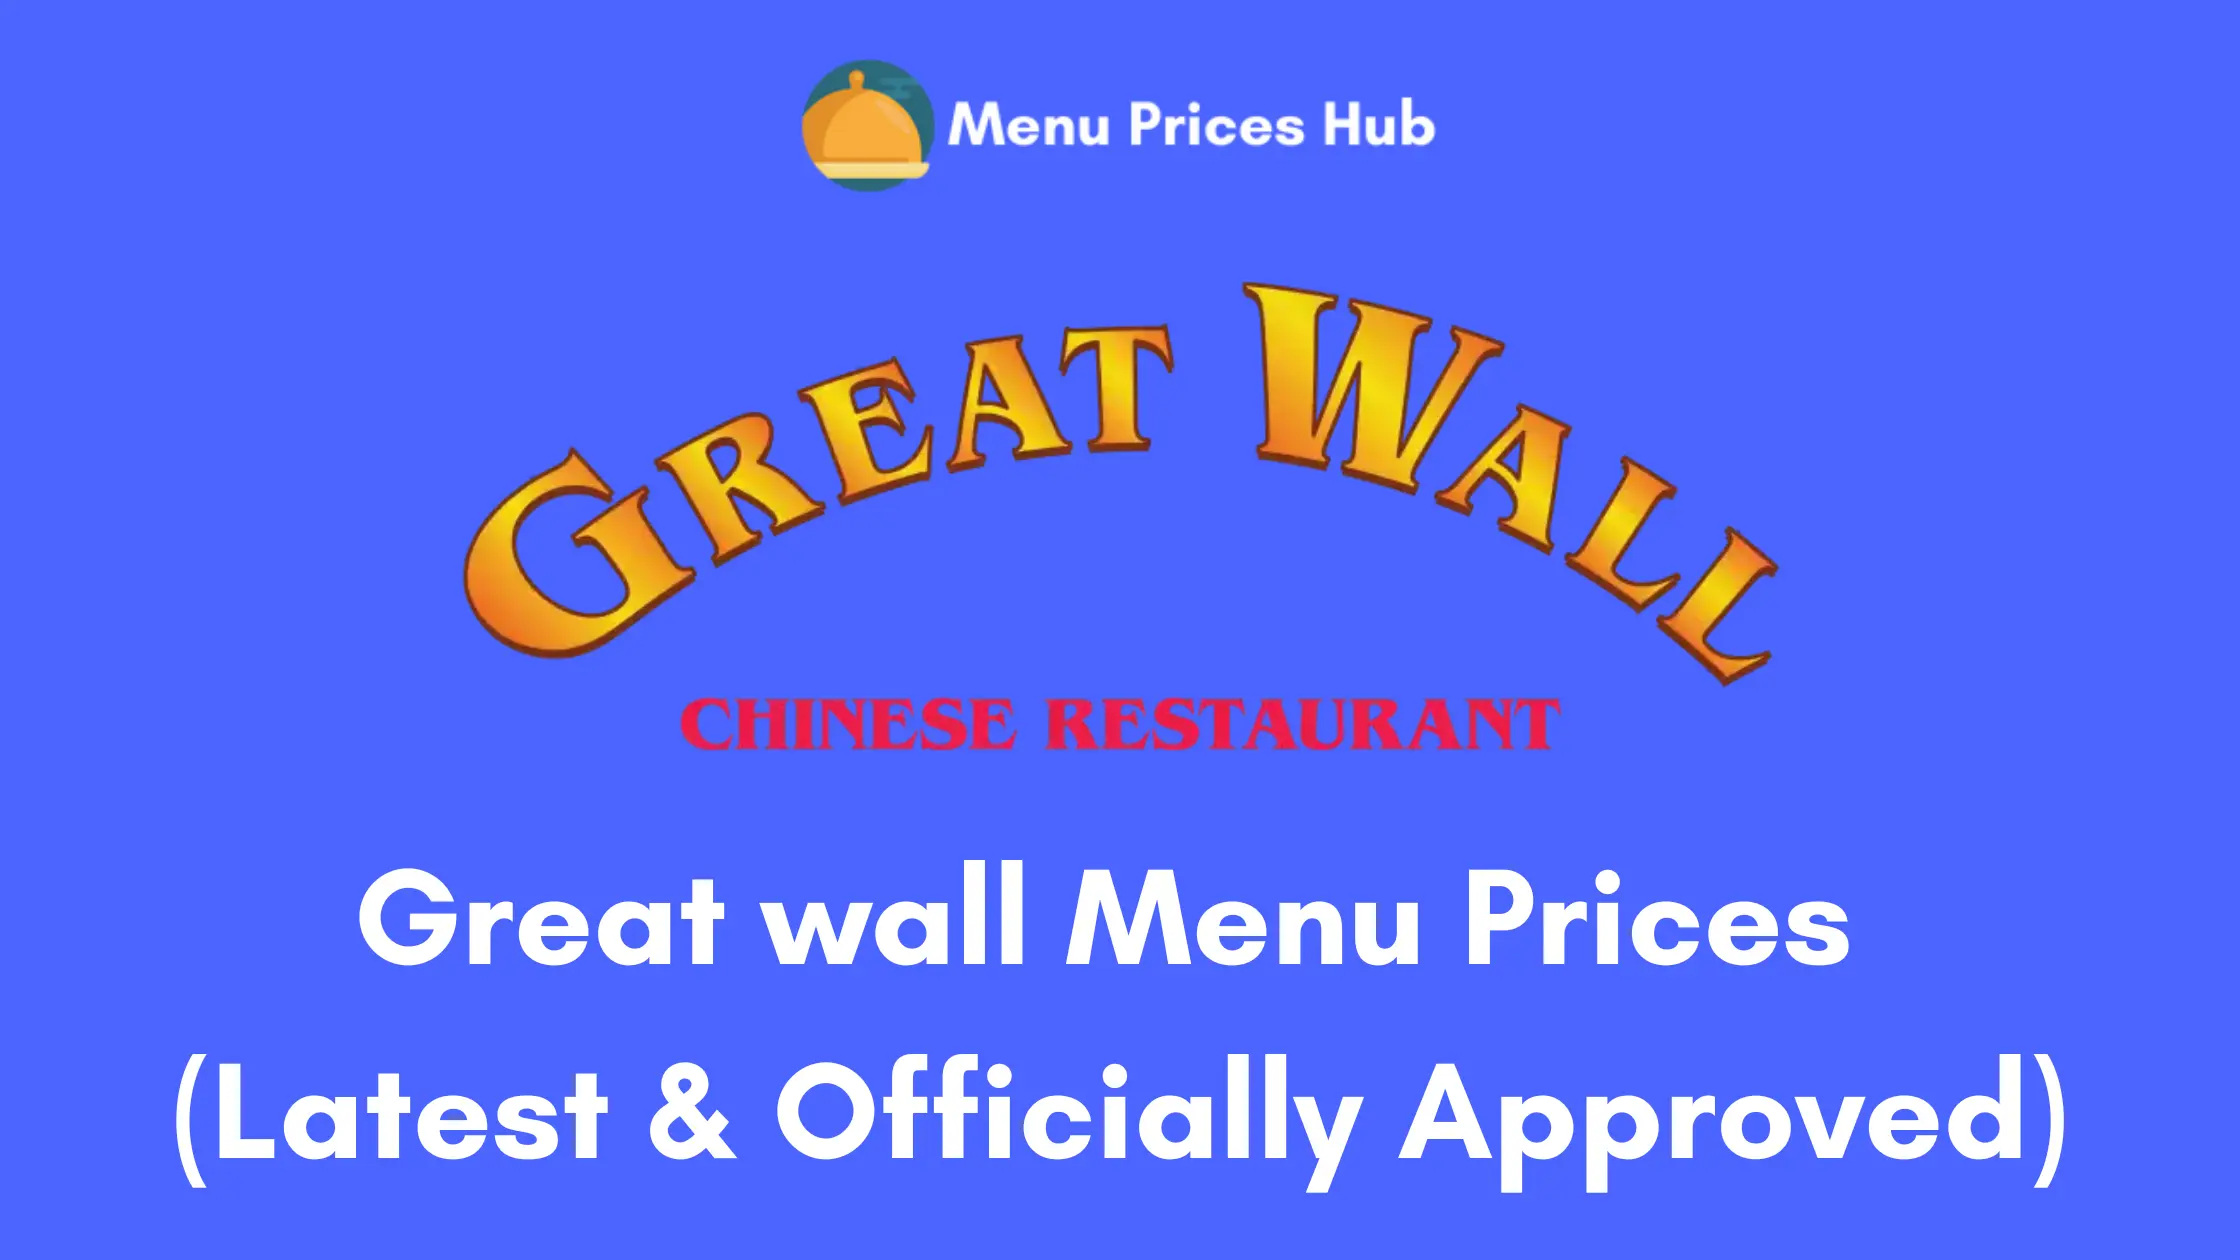 Great Wall Menu Prices